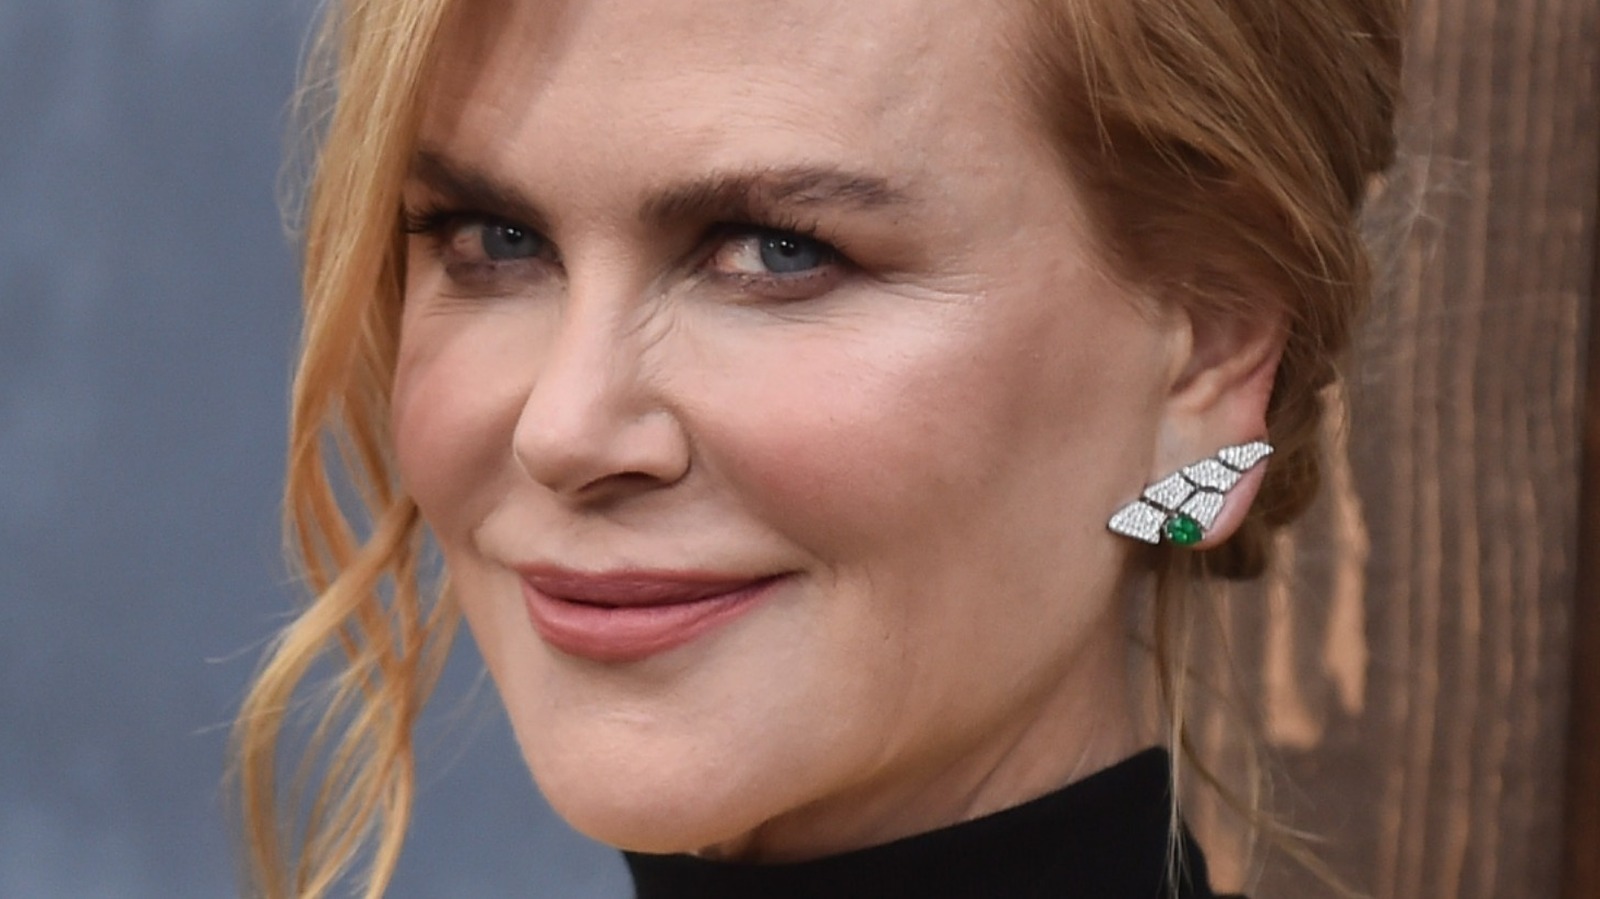 Nicole Kidman to star in new HBO limited series - AS USA